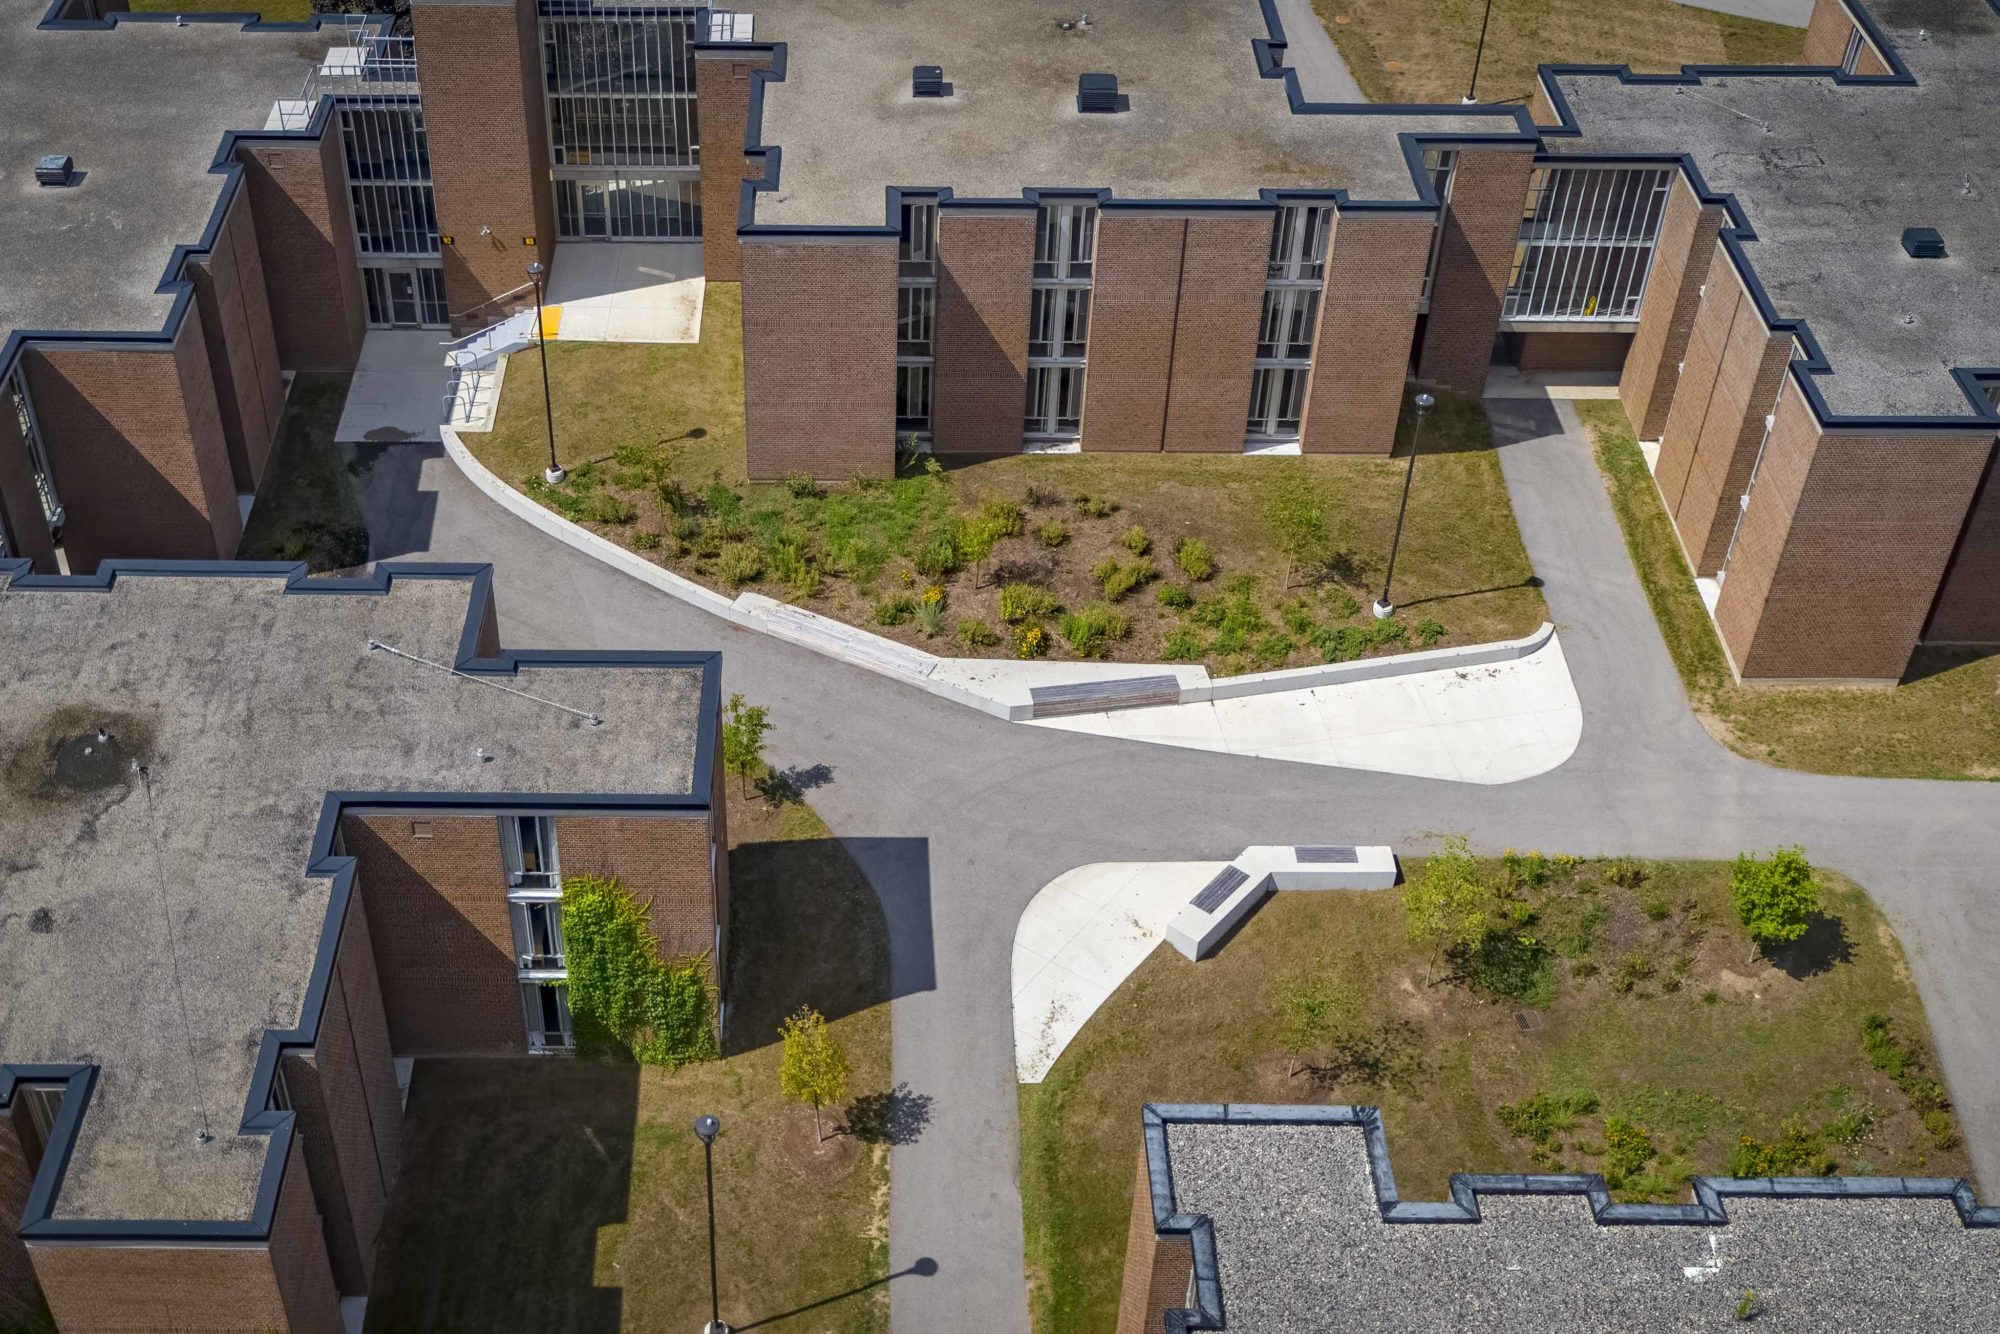 Aerial view of newly landscaped student residential buildings on the grounds of the University of Waterloo.